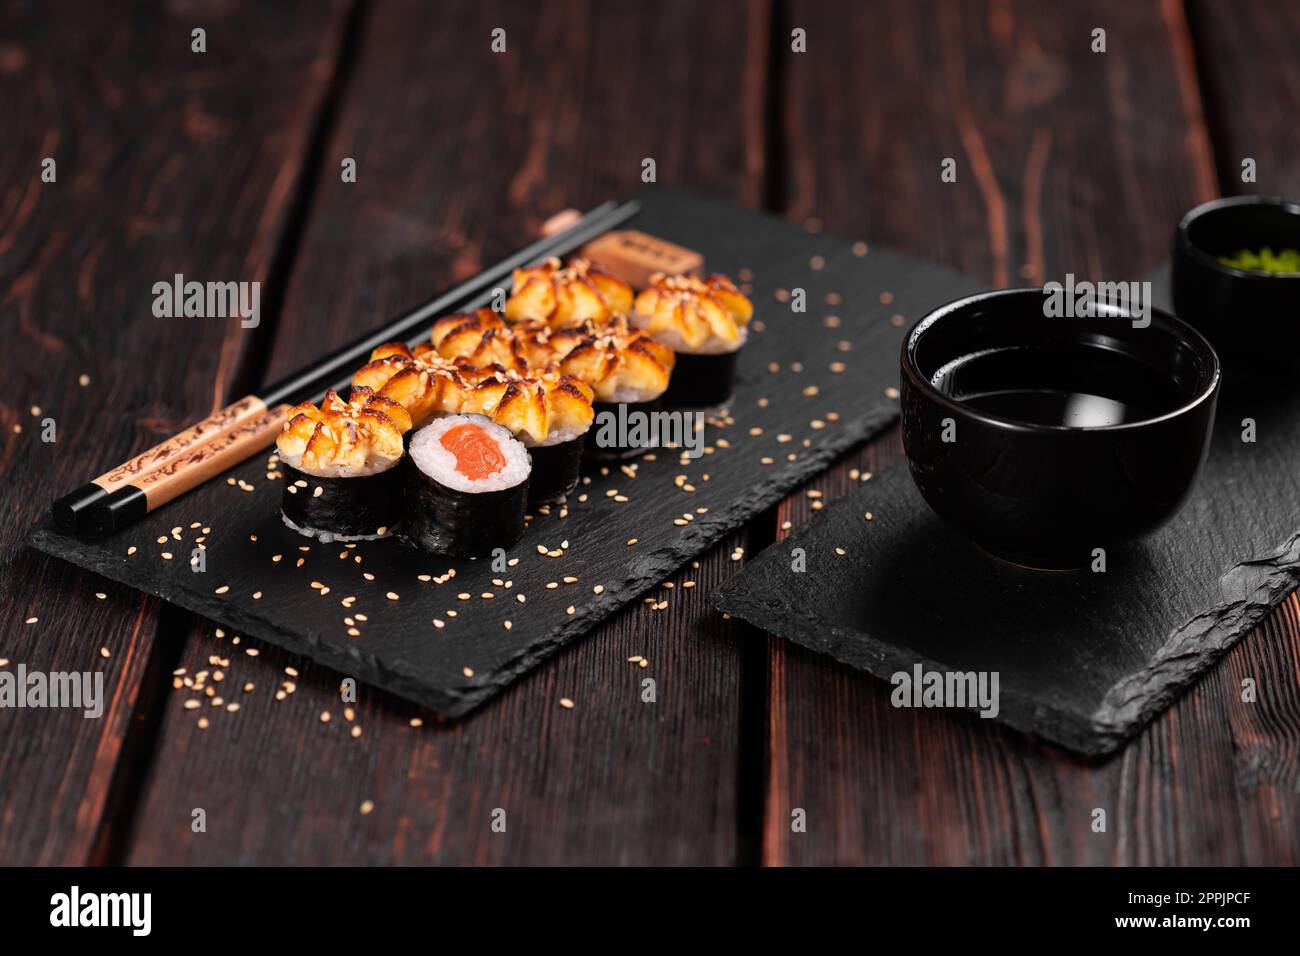 Japanese hot maki roll sushi with salmon - asian food concept Stock Photo